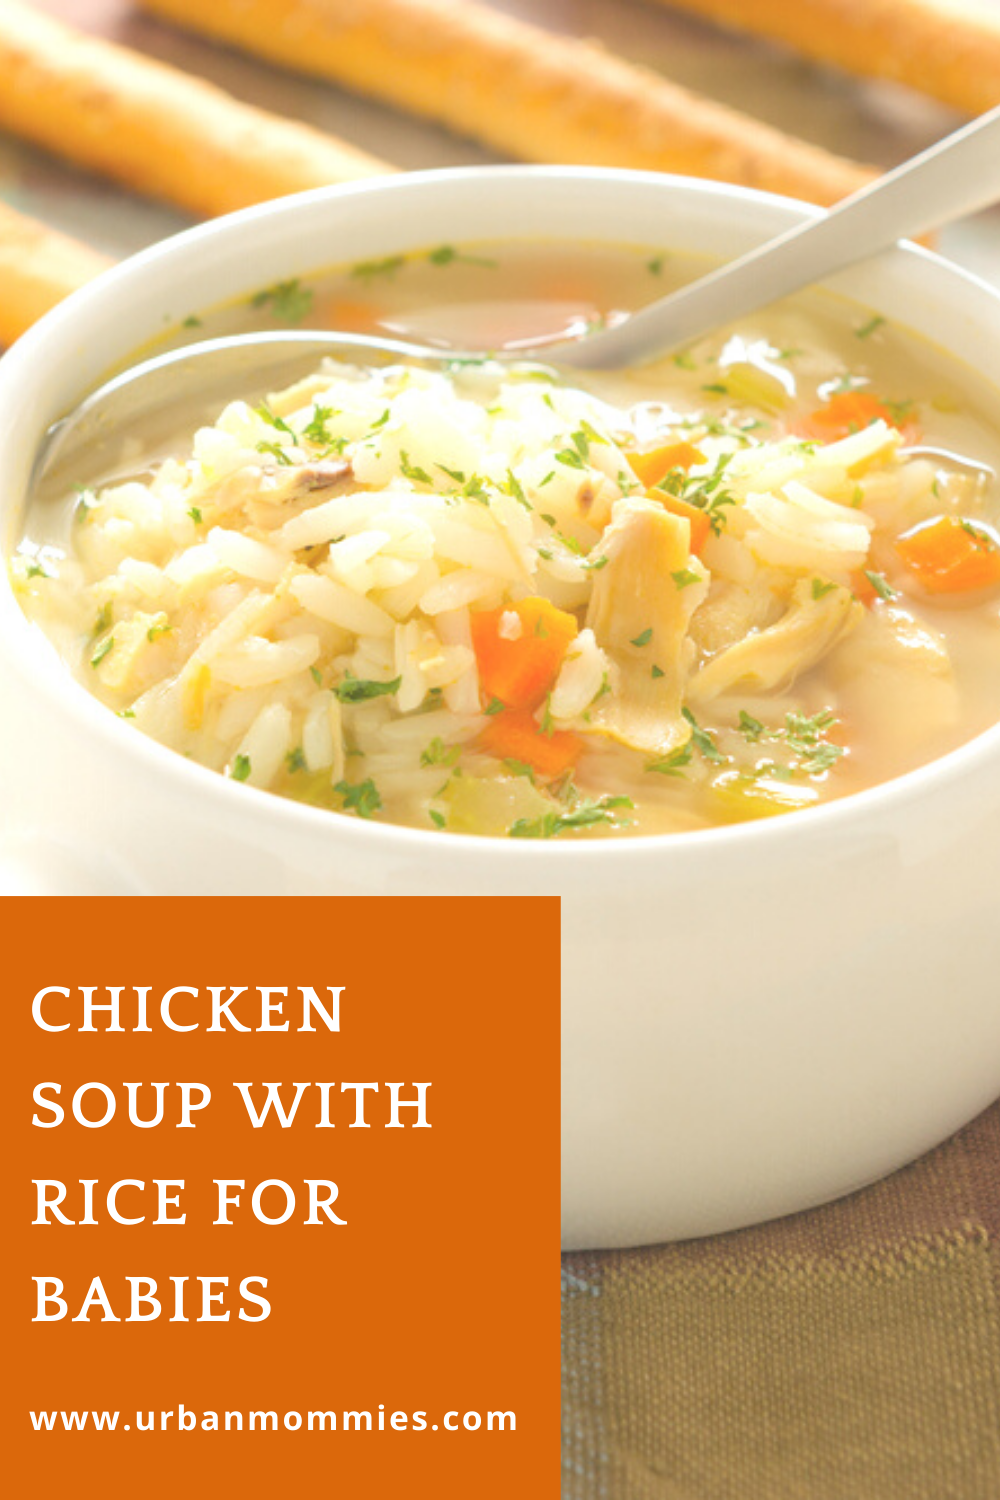 Chicken soup with rice for babies